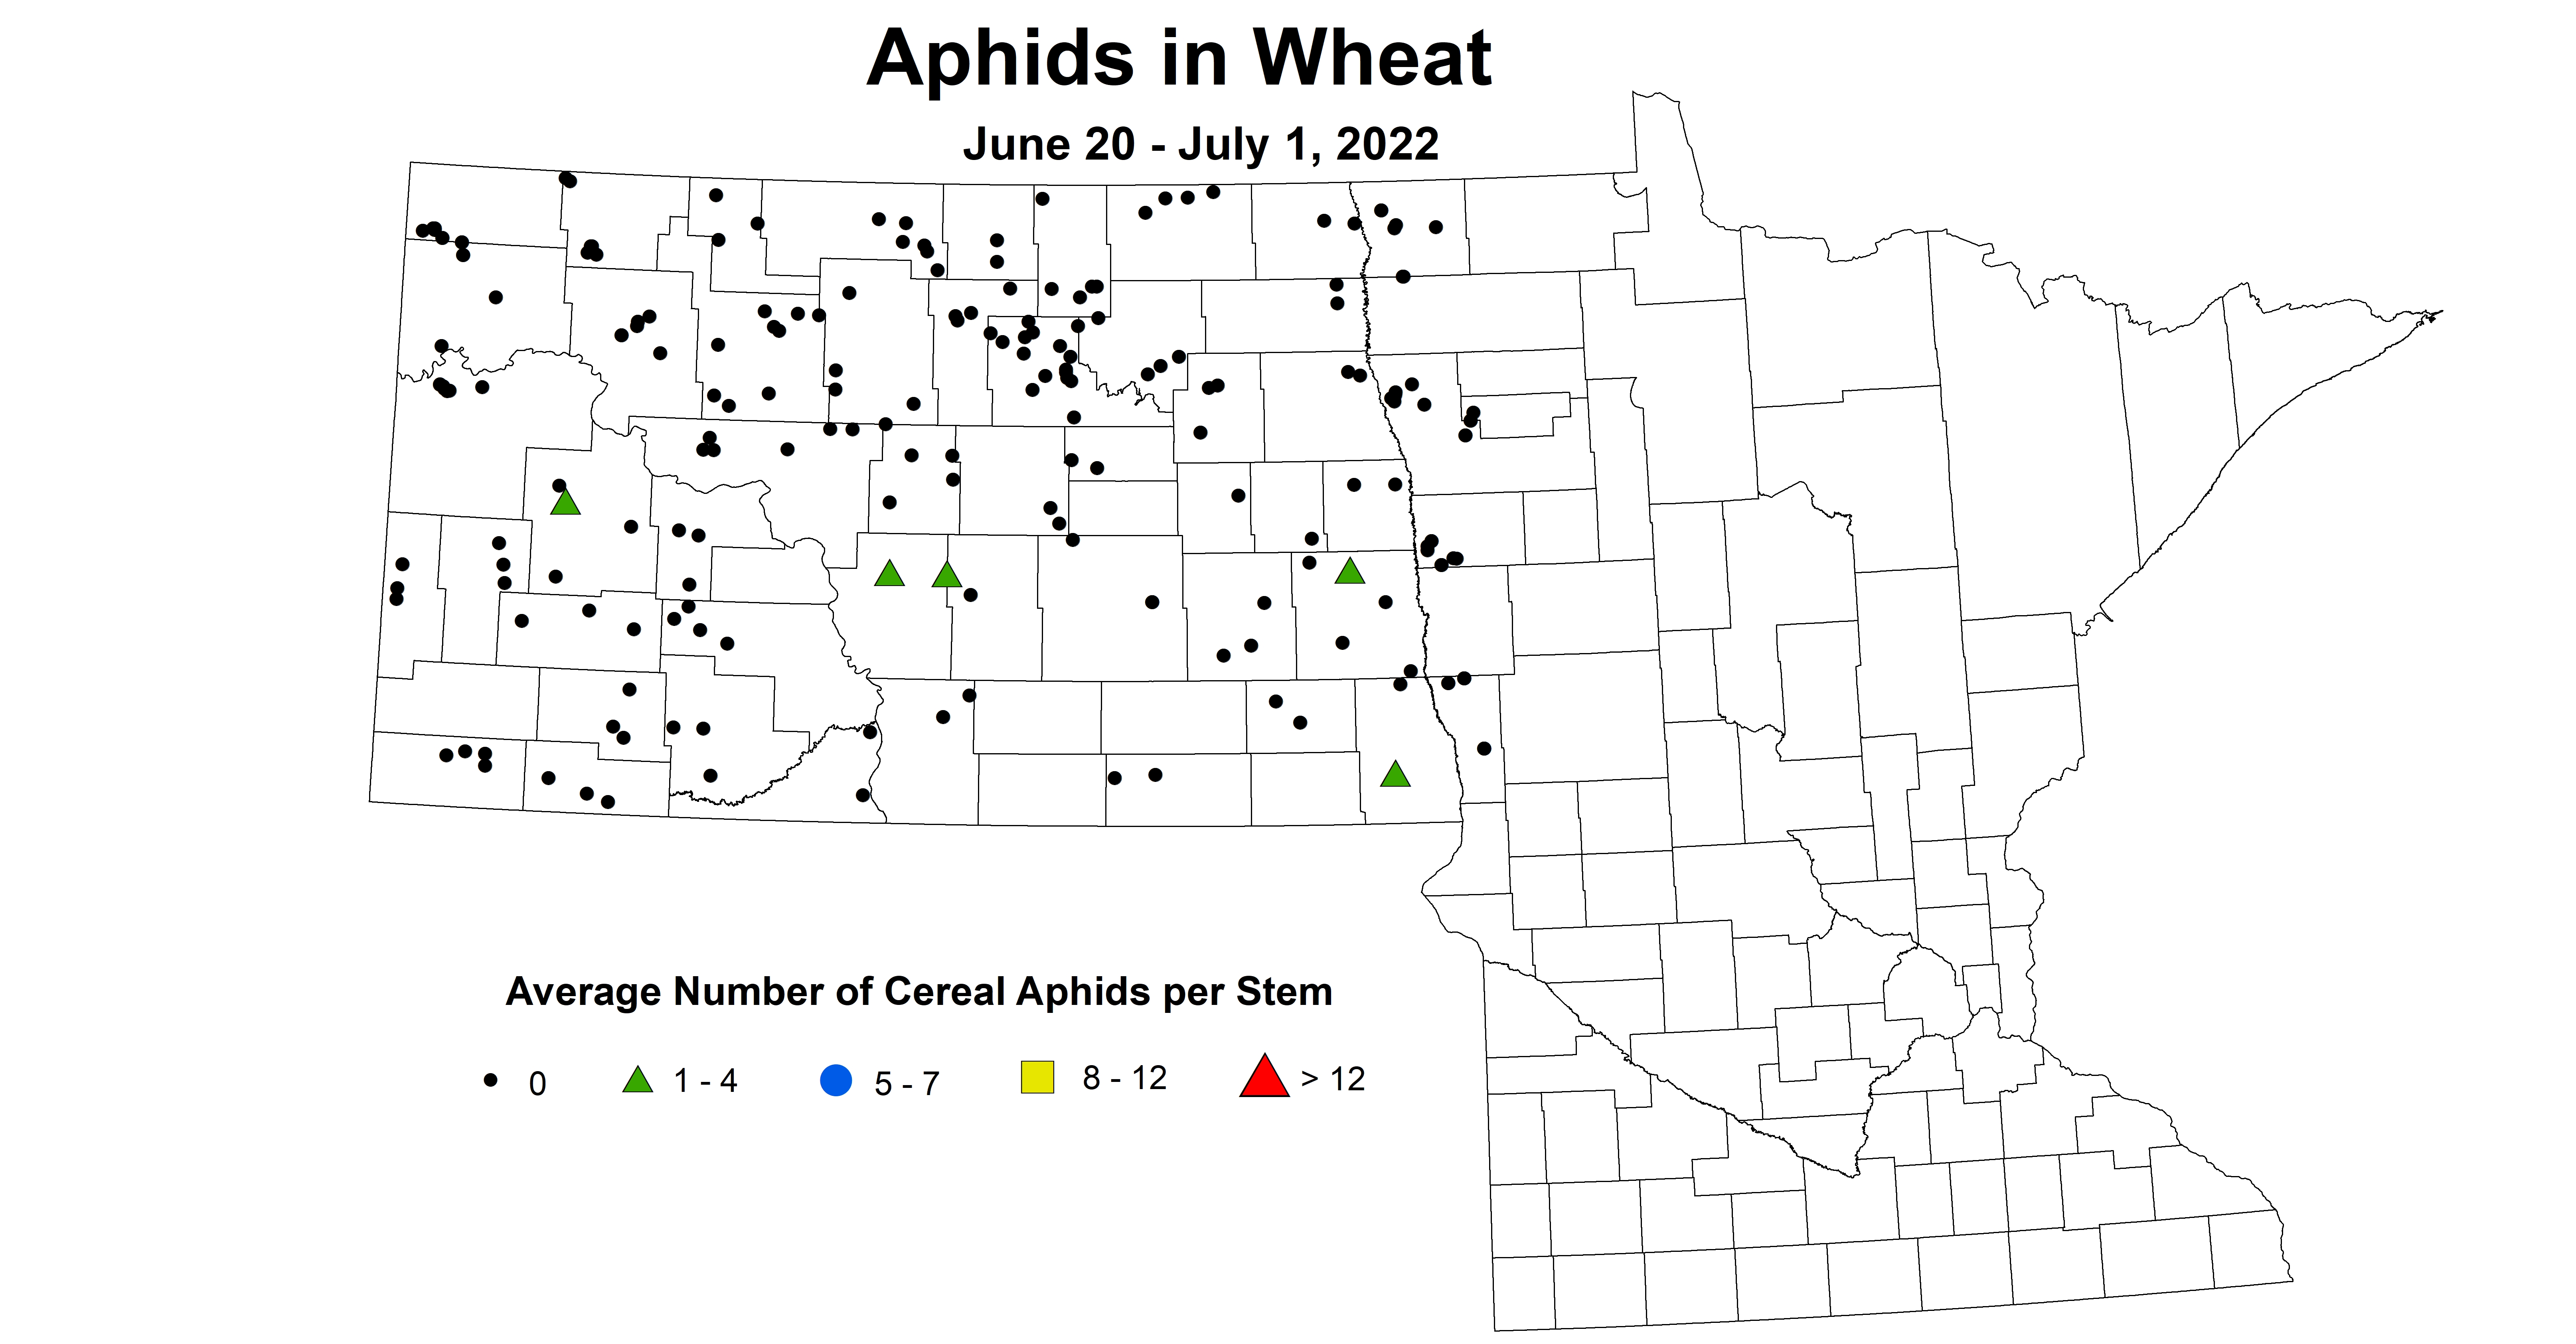 ND IPM map of wheat aphids June 20 to July 1, 2022